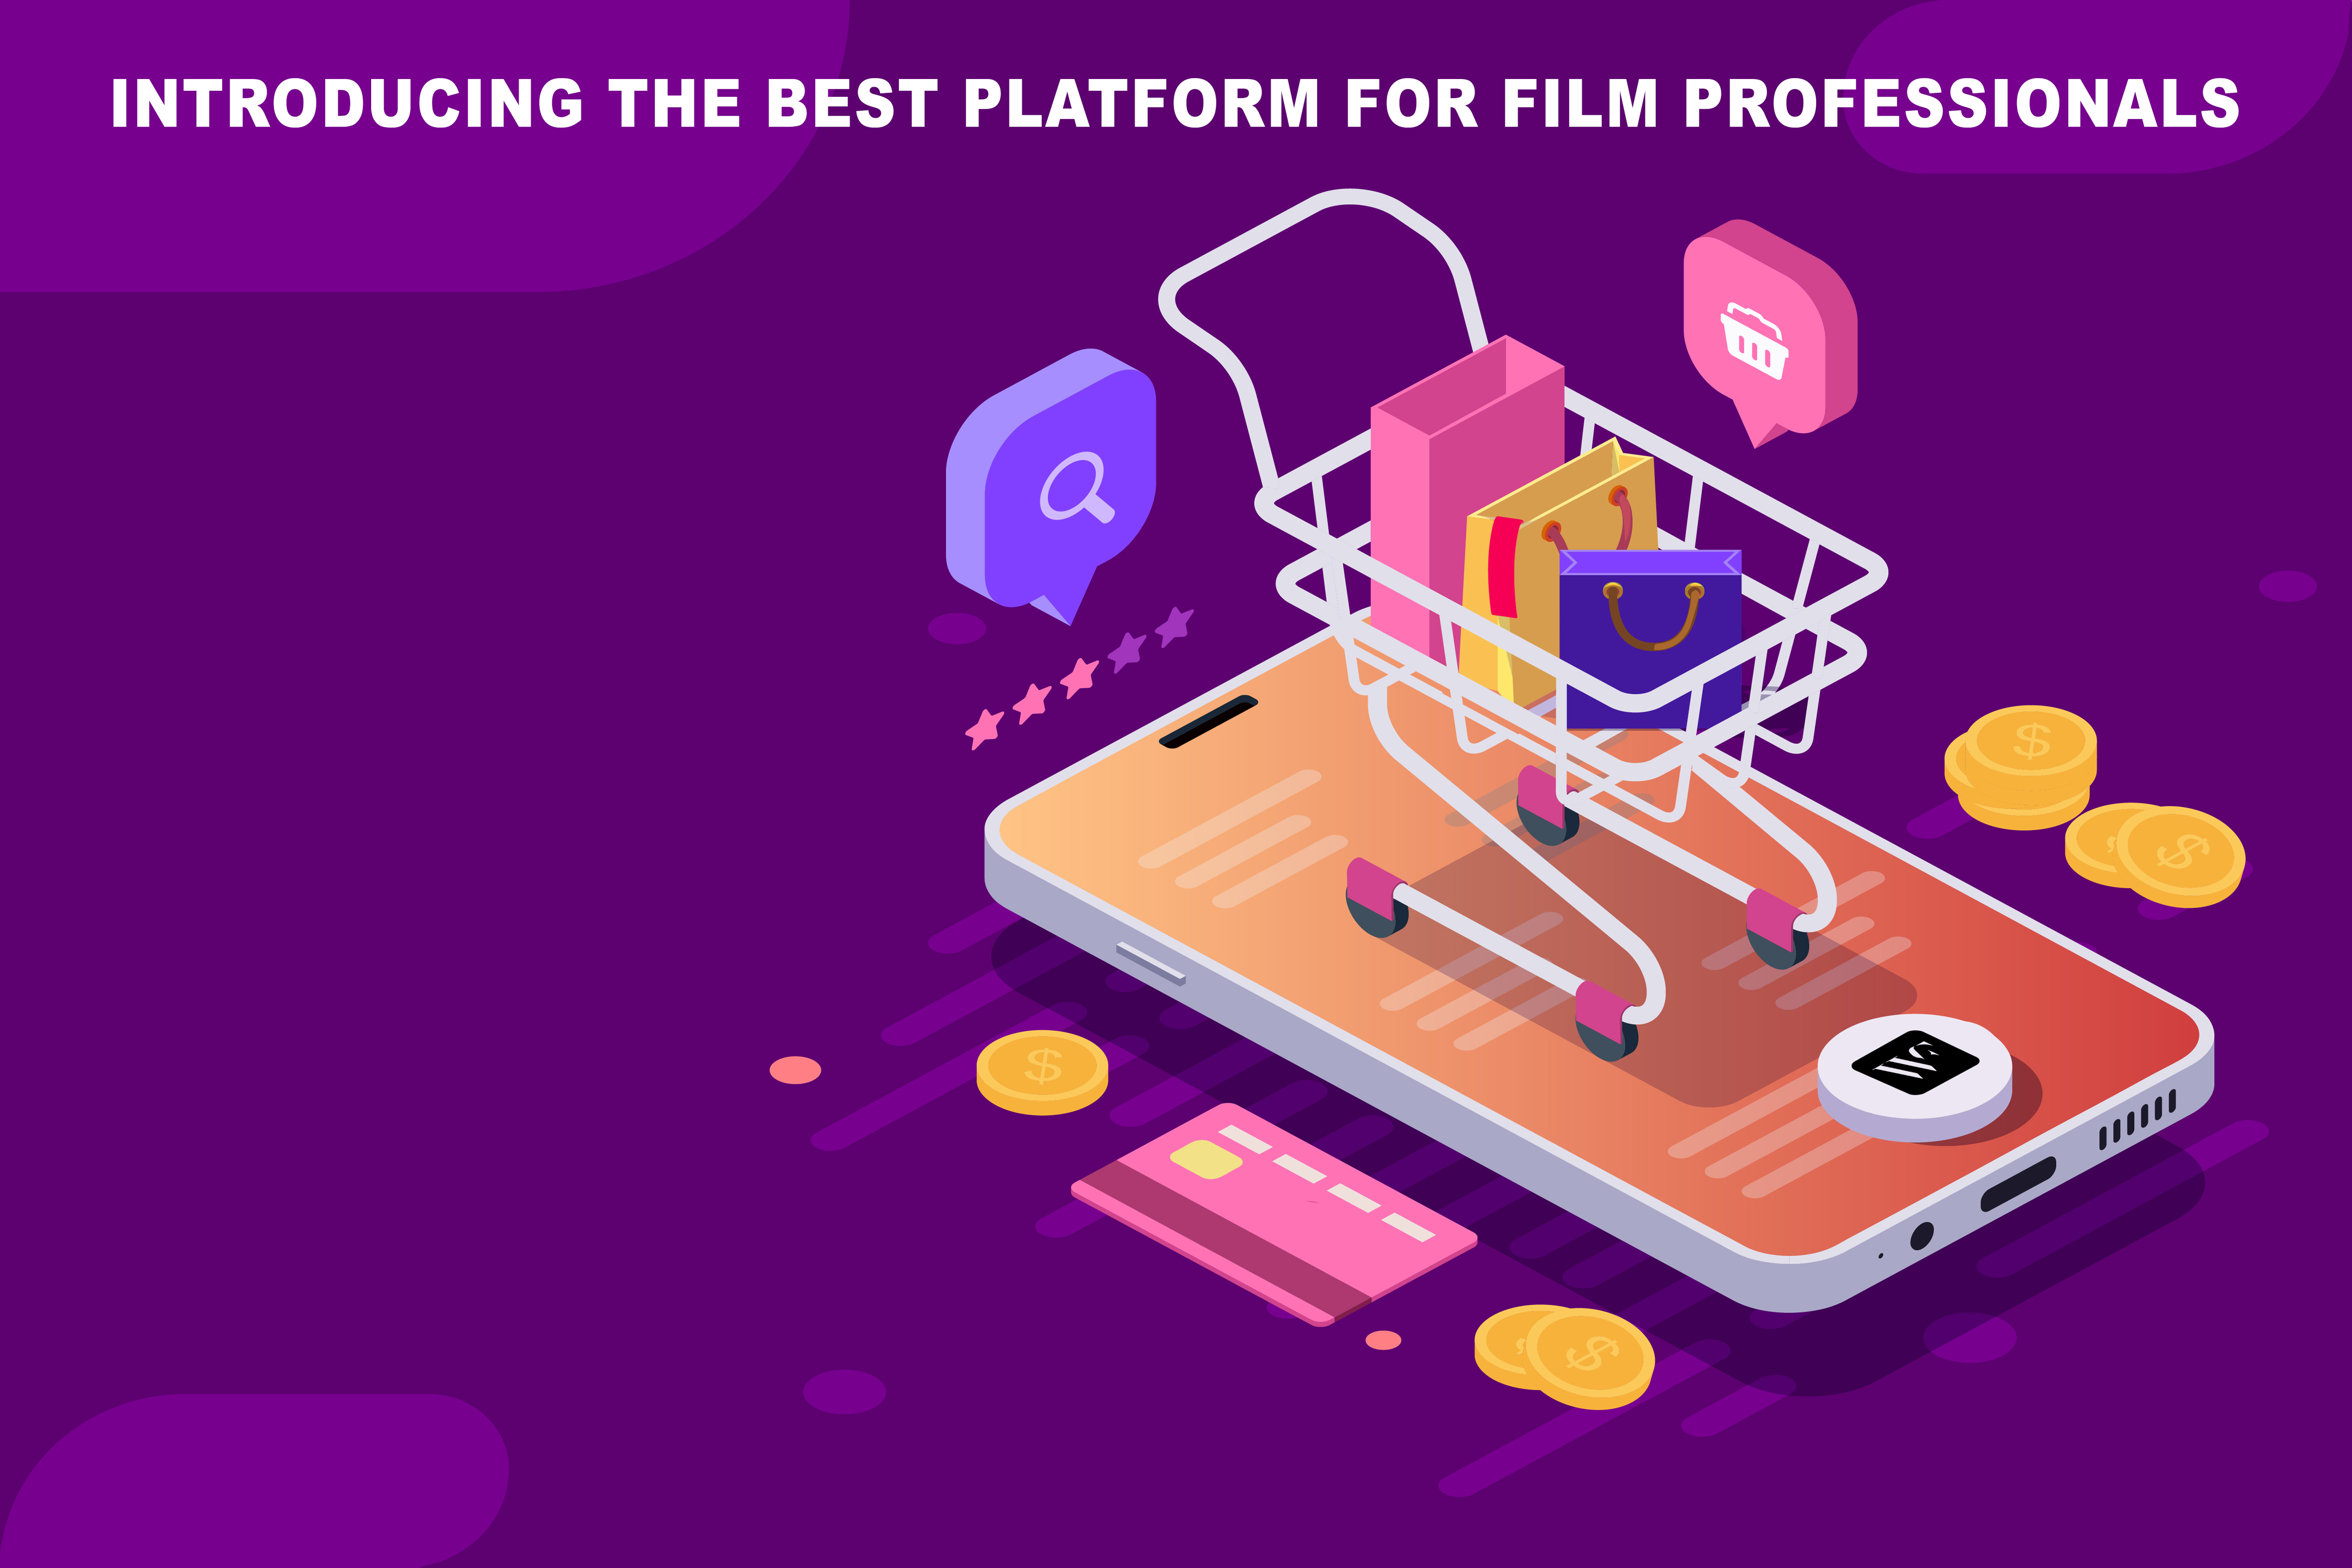 Introducing the best platform for film professionals